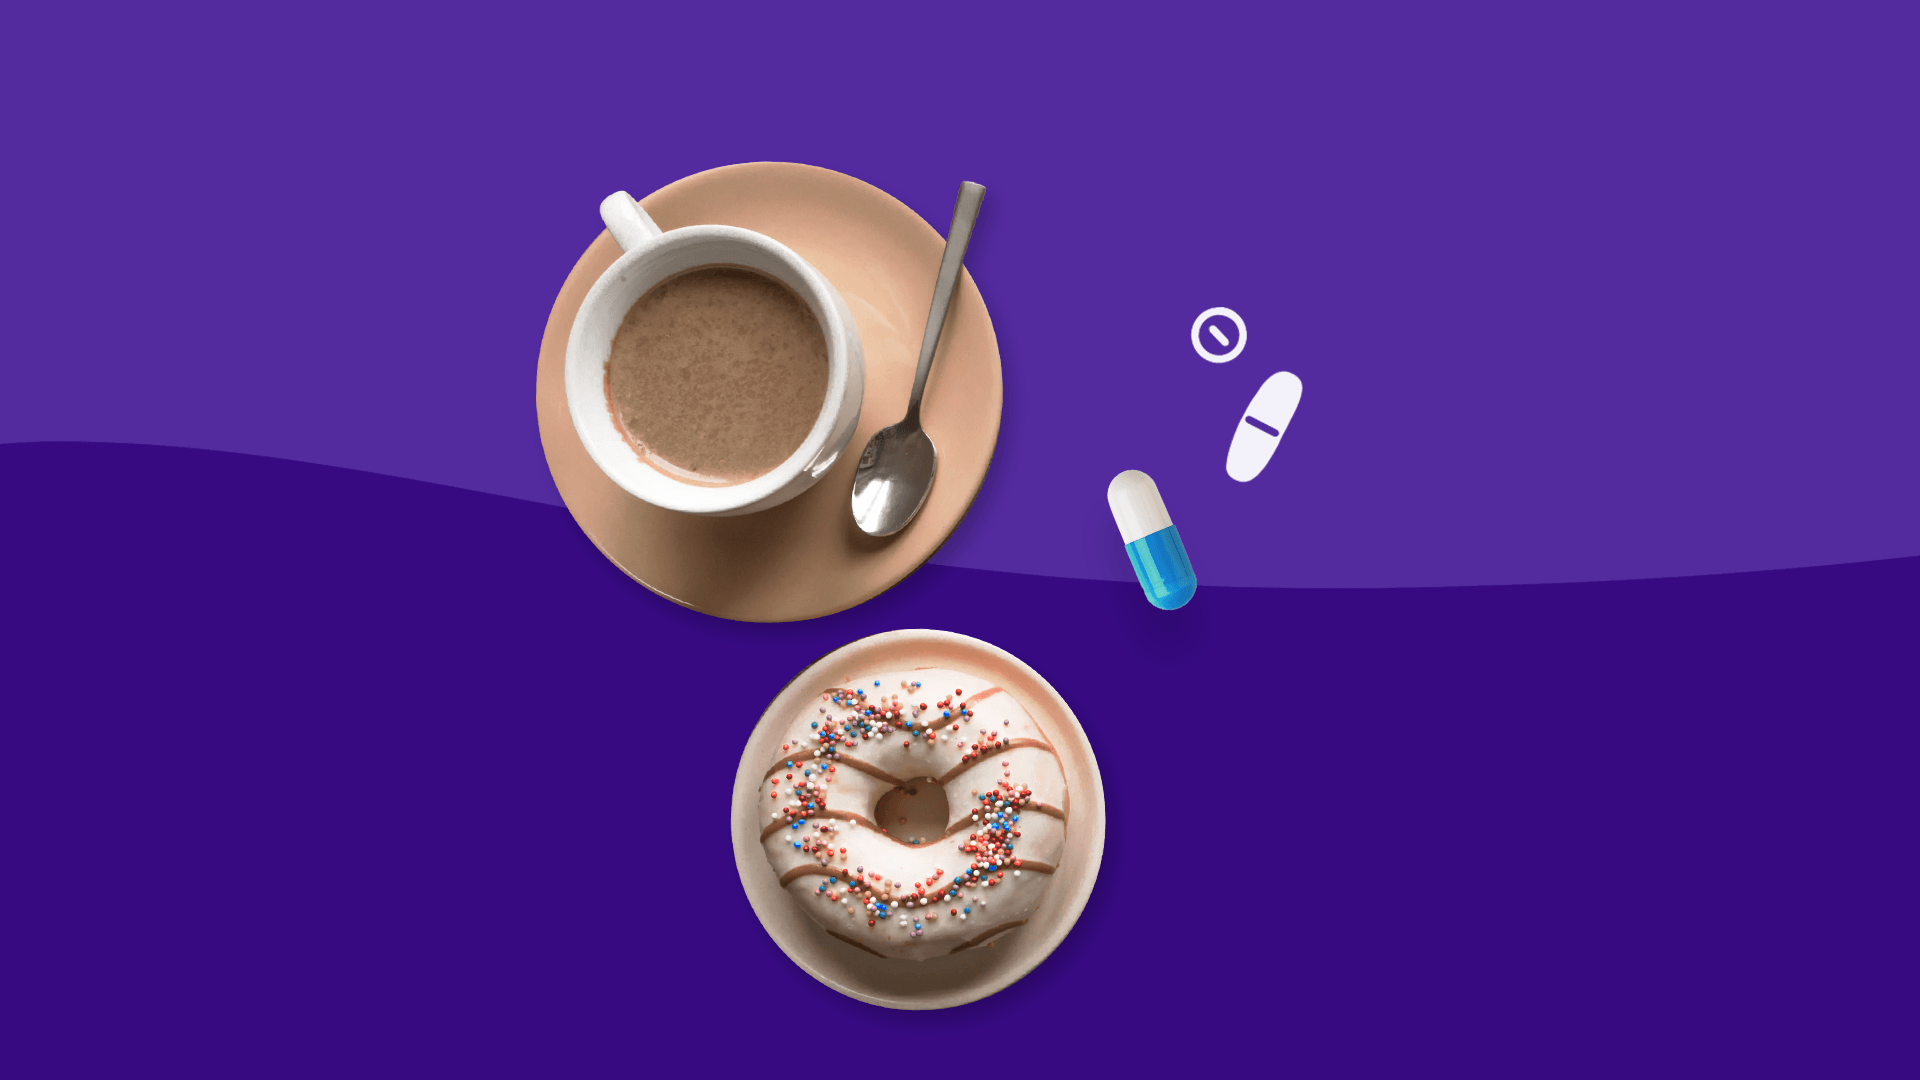 Vyvanse and coffee